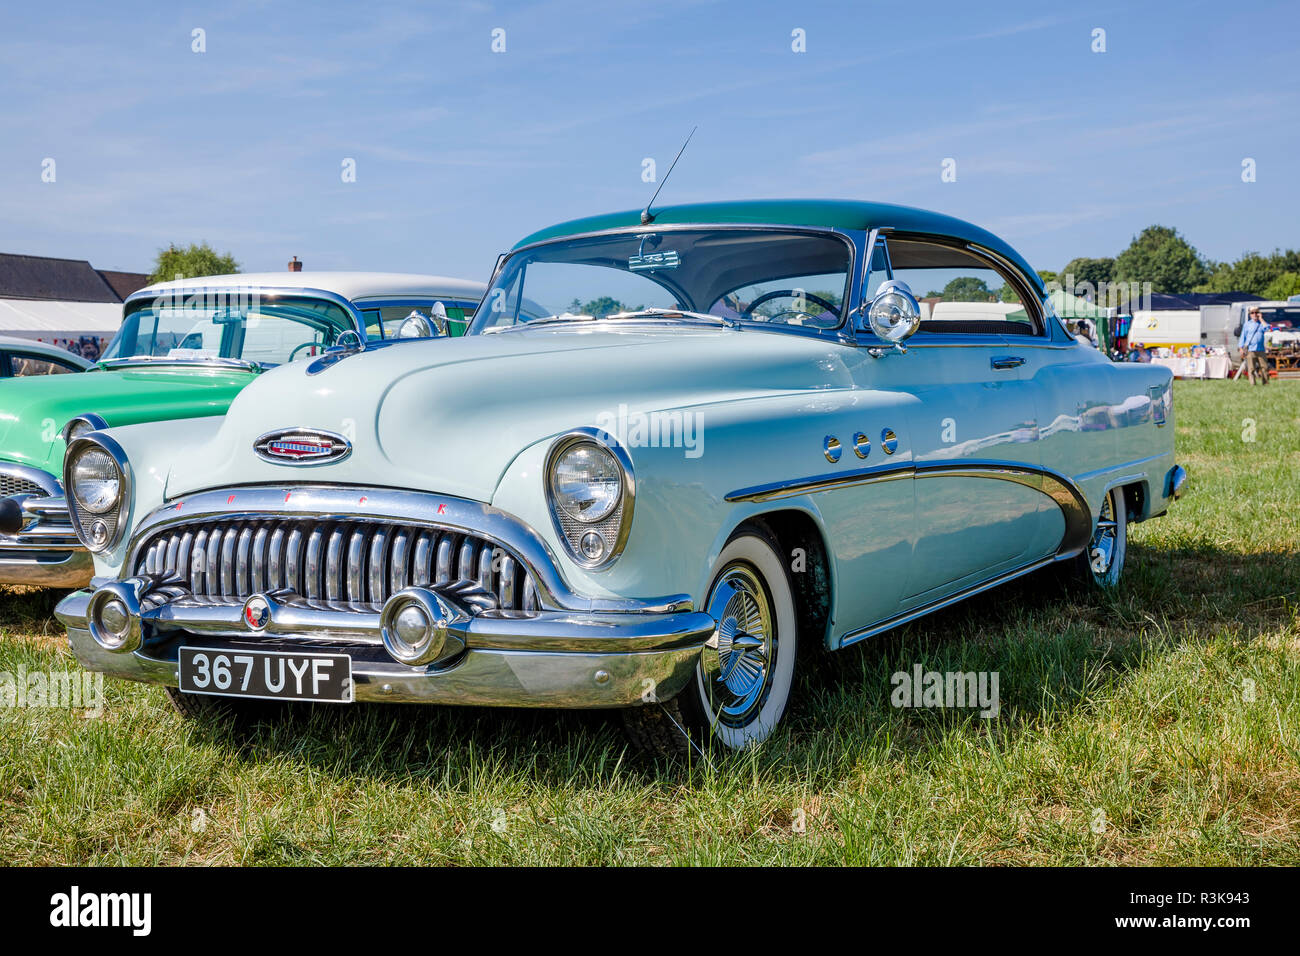 An old American Buick Special kept running from the 1950s and on display at a Country Fair in Heddington Wiltshire England UK in 2018 Stock Photo